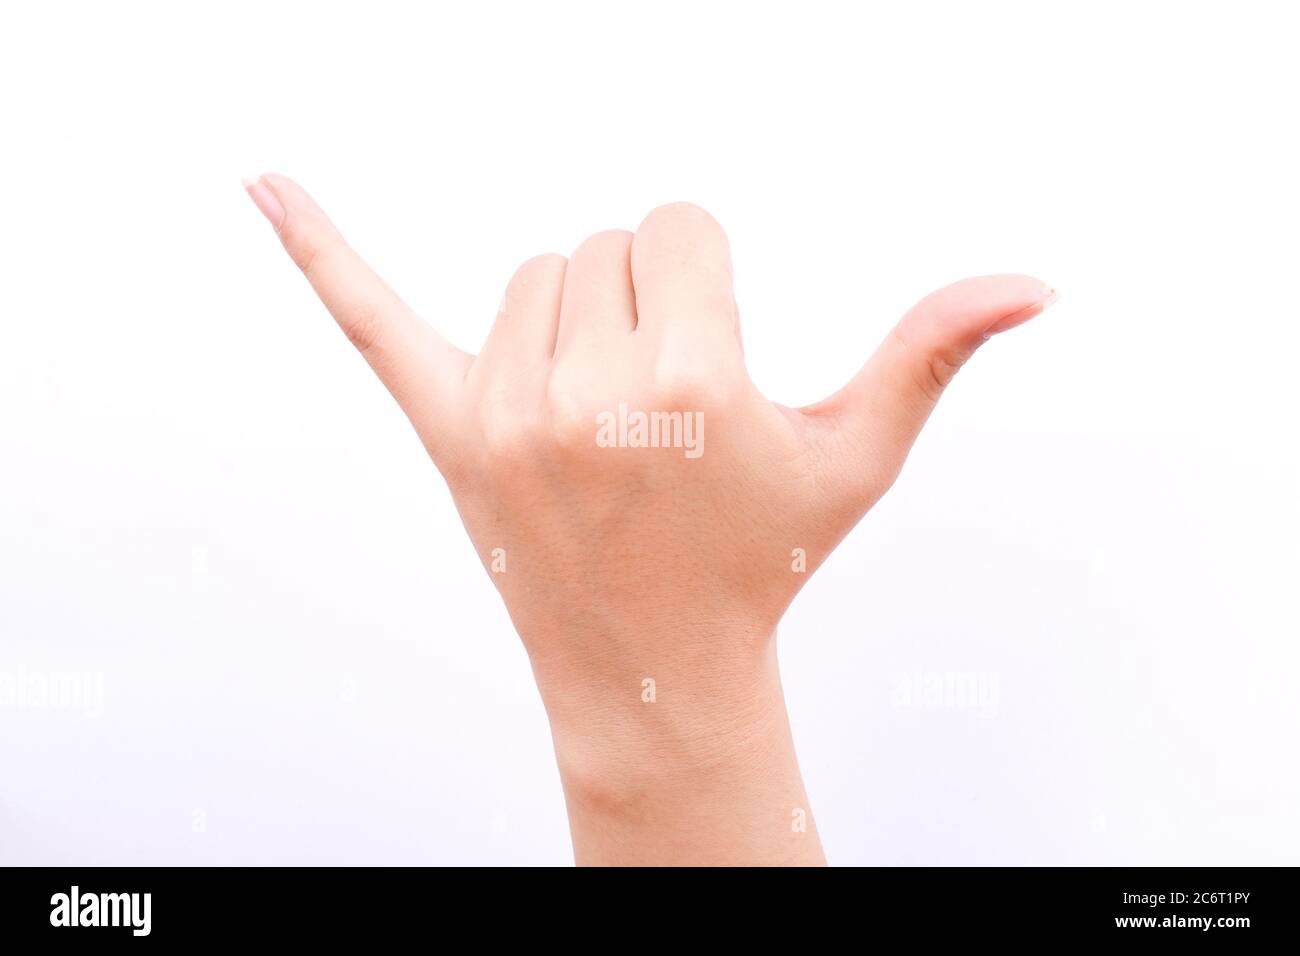 finger hand symbols isolated concept hand making a call phone or carabao country music sign  on white background Stock Photo